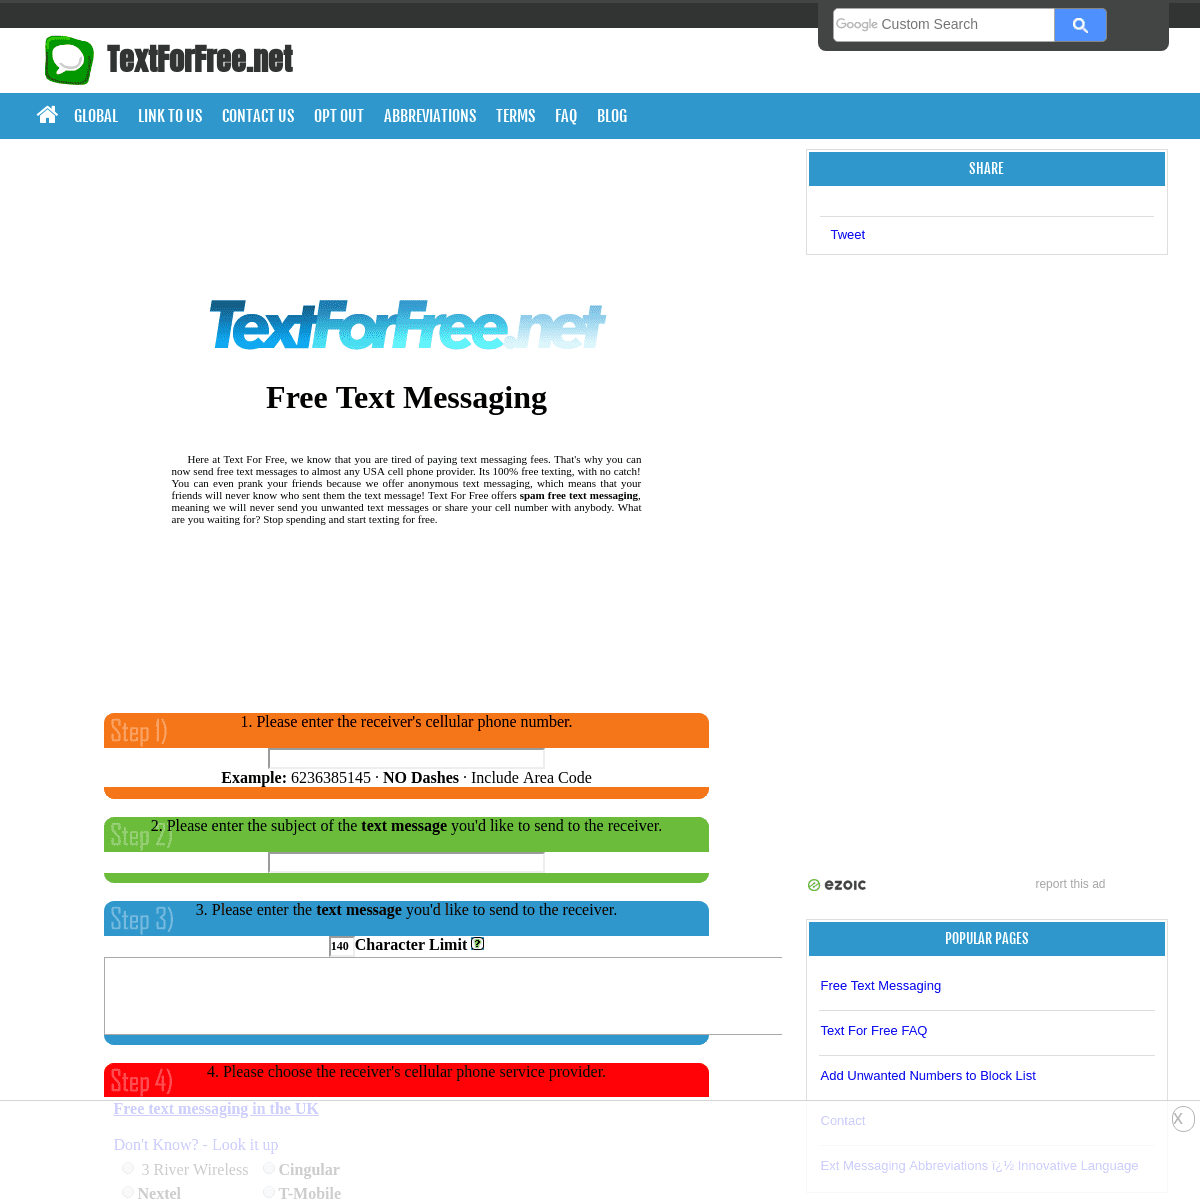 A complete backup of textforfree.net